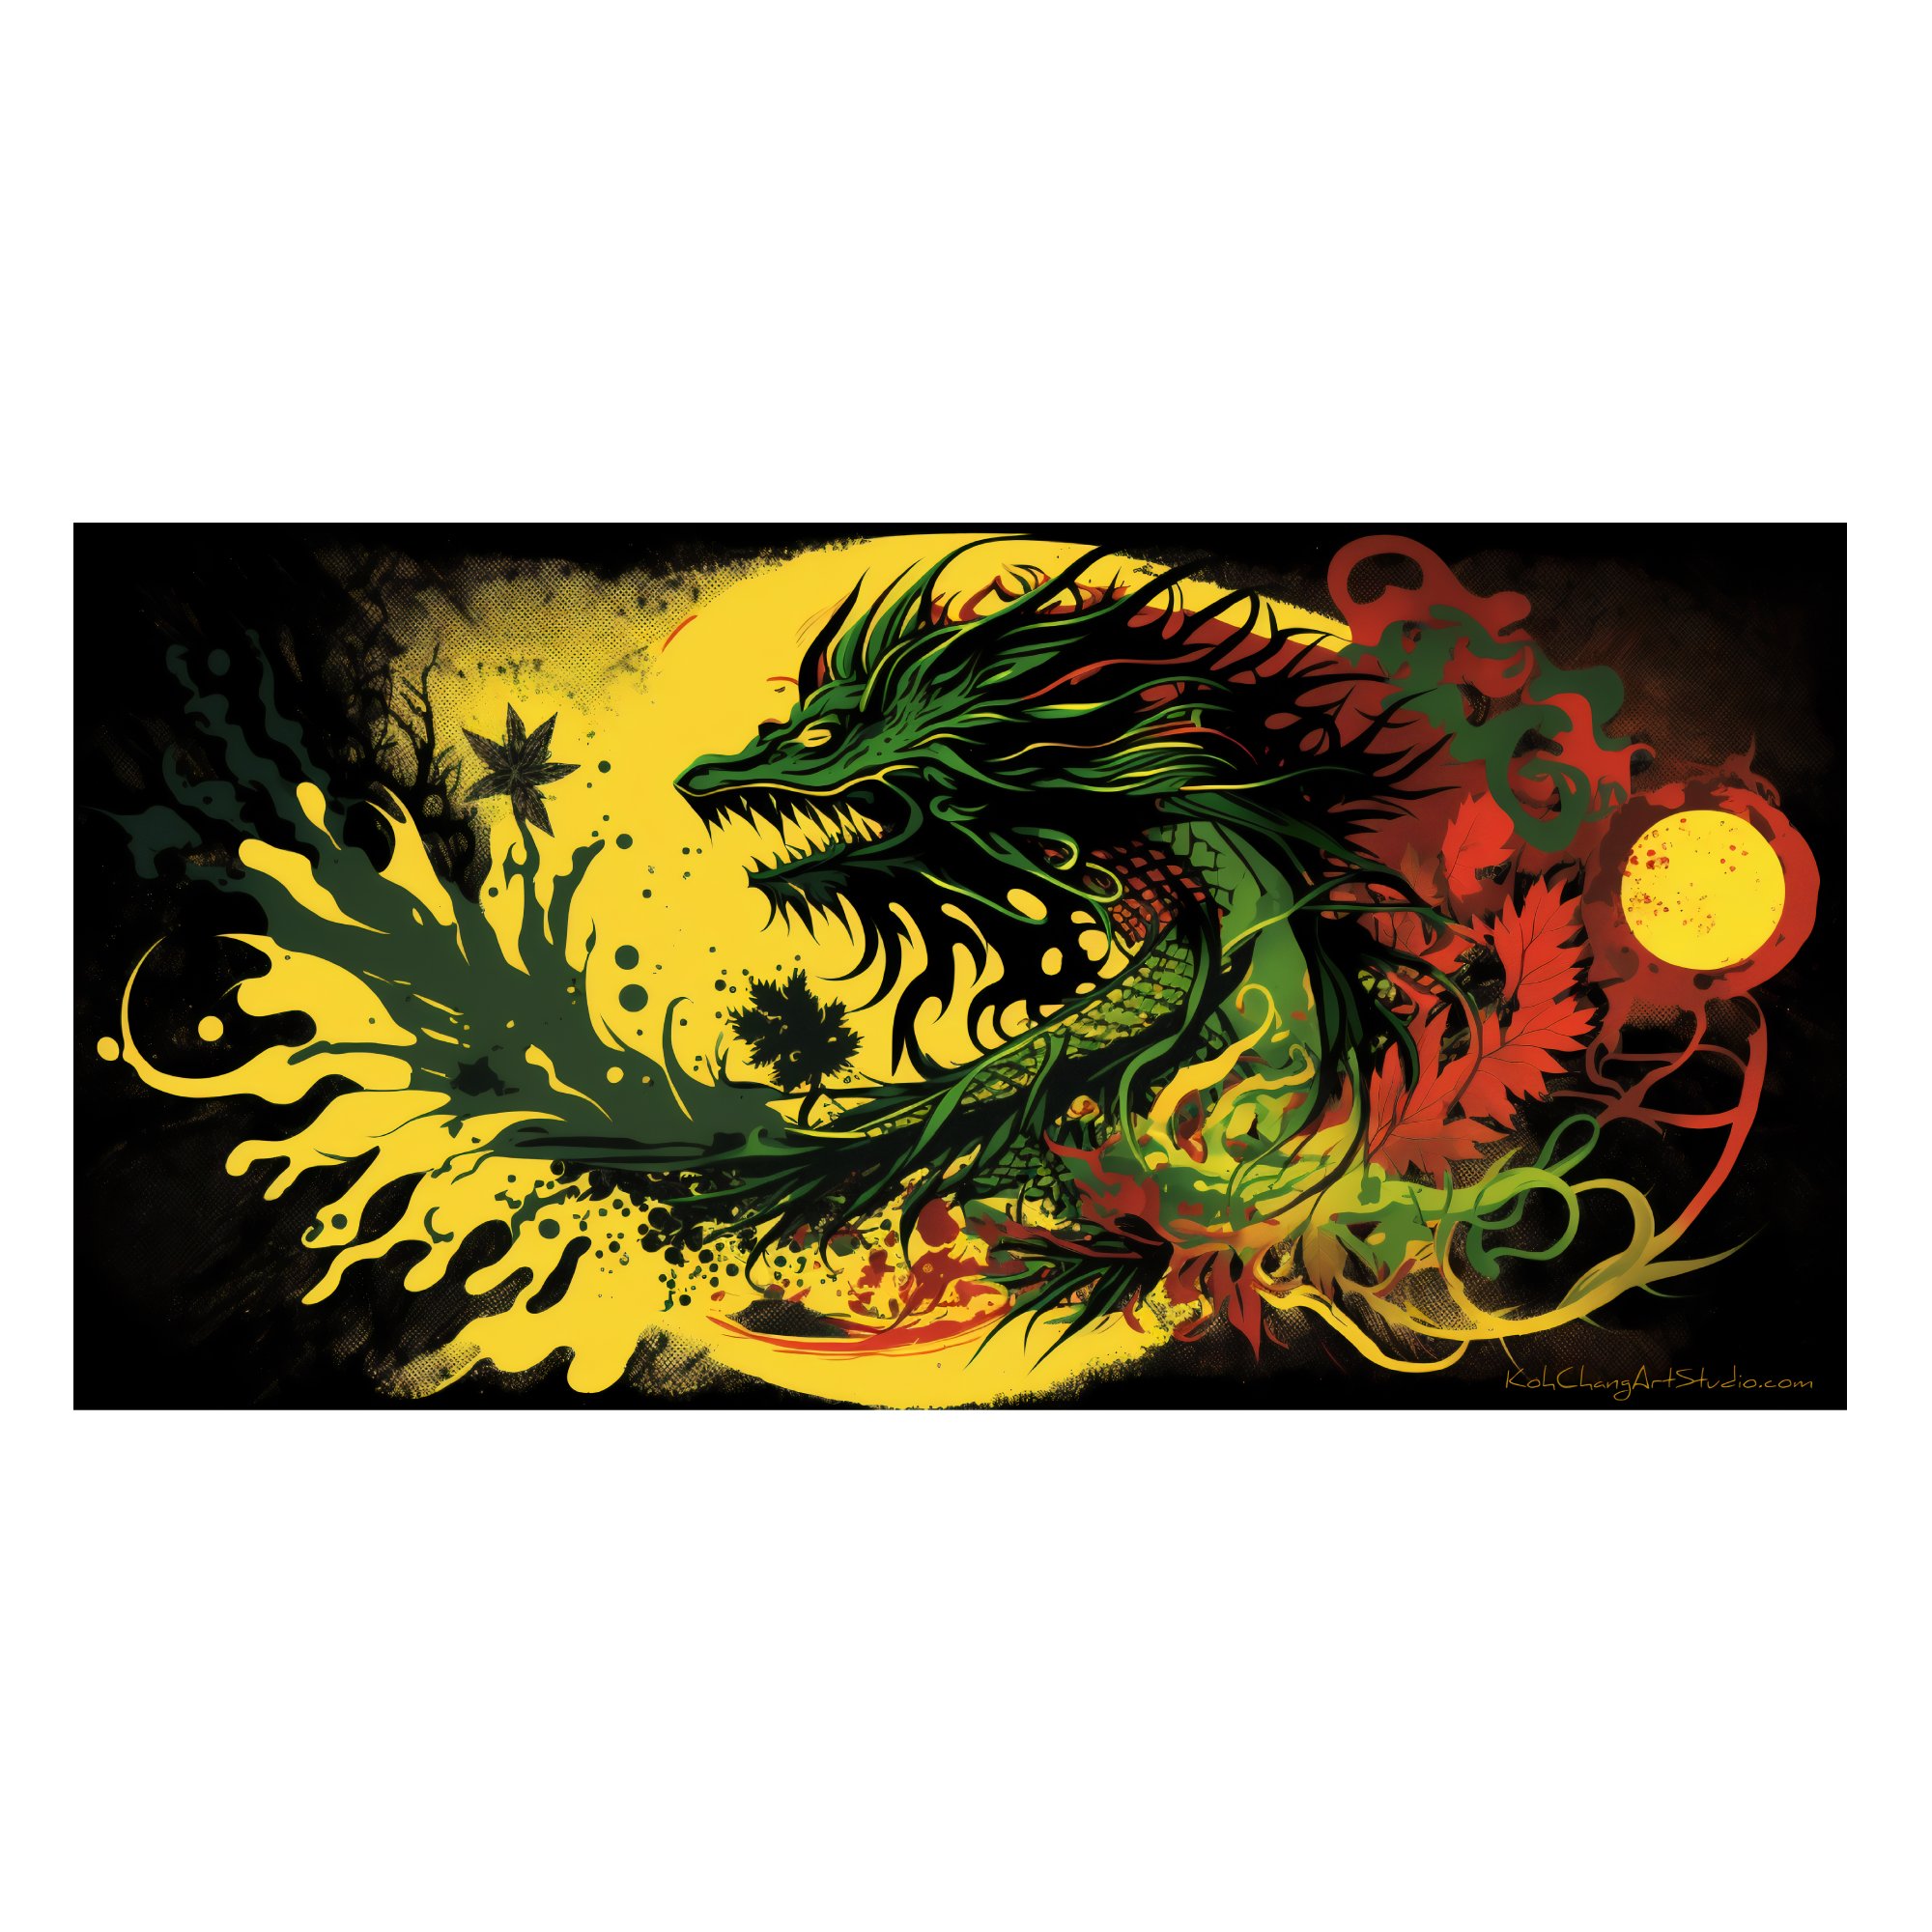 WYRM’S WHISPER Artistic Representation - Dragon drenched in hues, whispering tales and secrets of the herb.